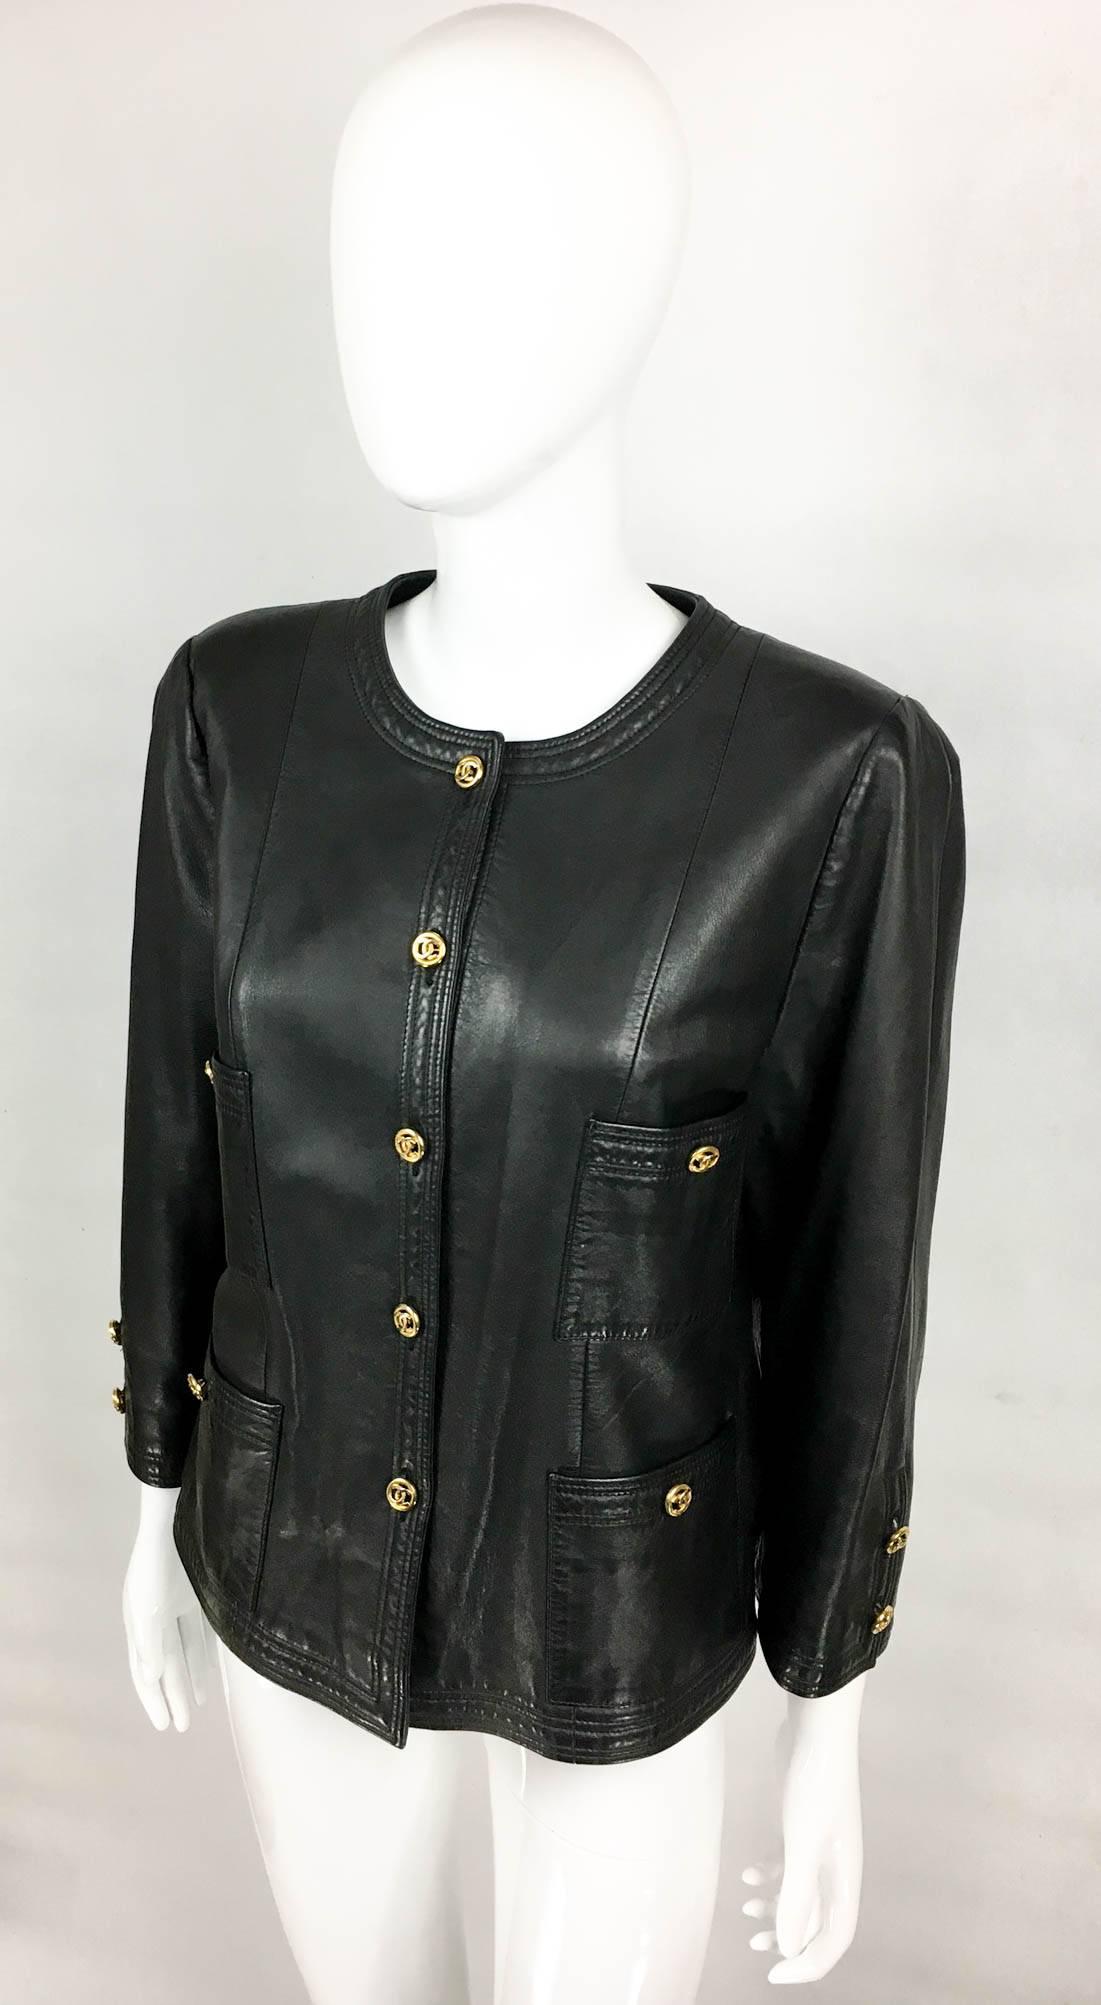 Chanel Black Leather Jacket With Gold-Tone Logo Buttons - 1980s 2